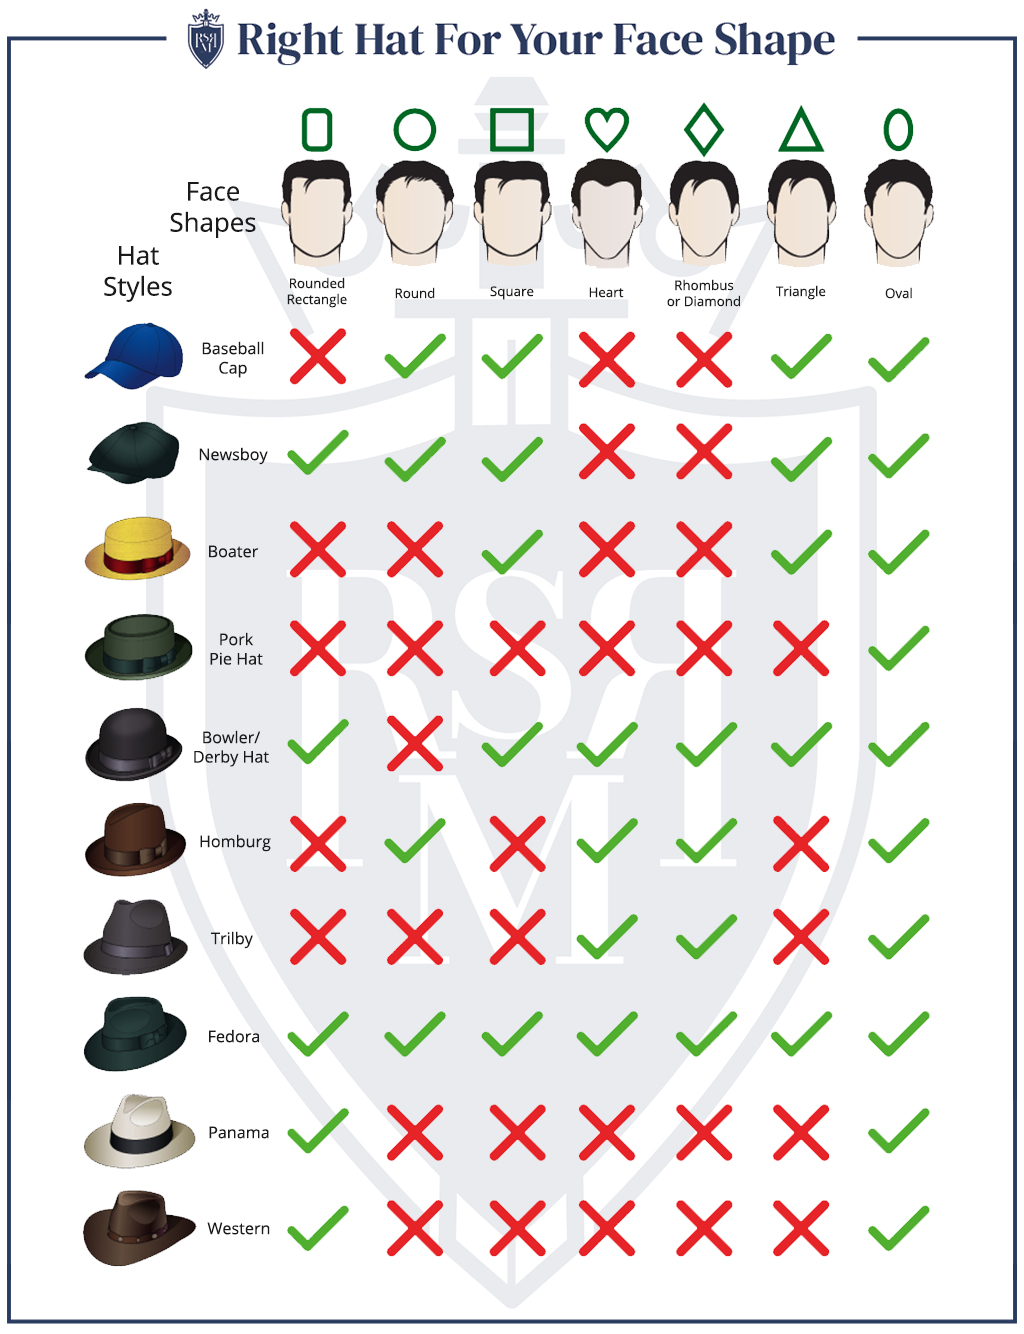 Infographic - Right Hat For Your Face Shape